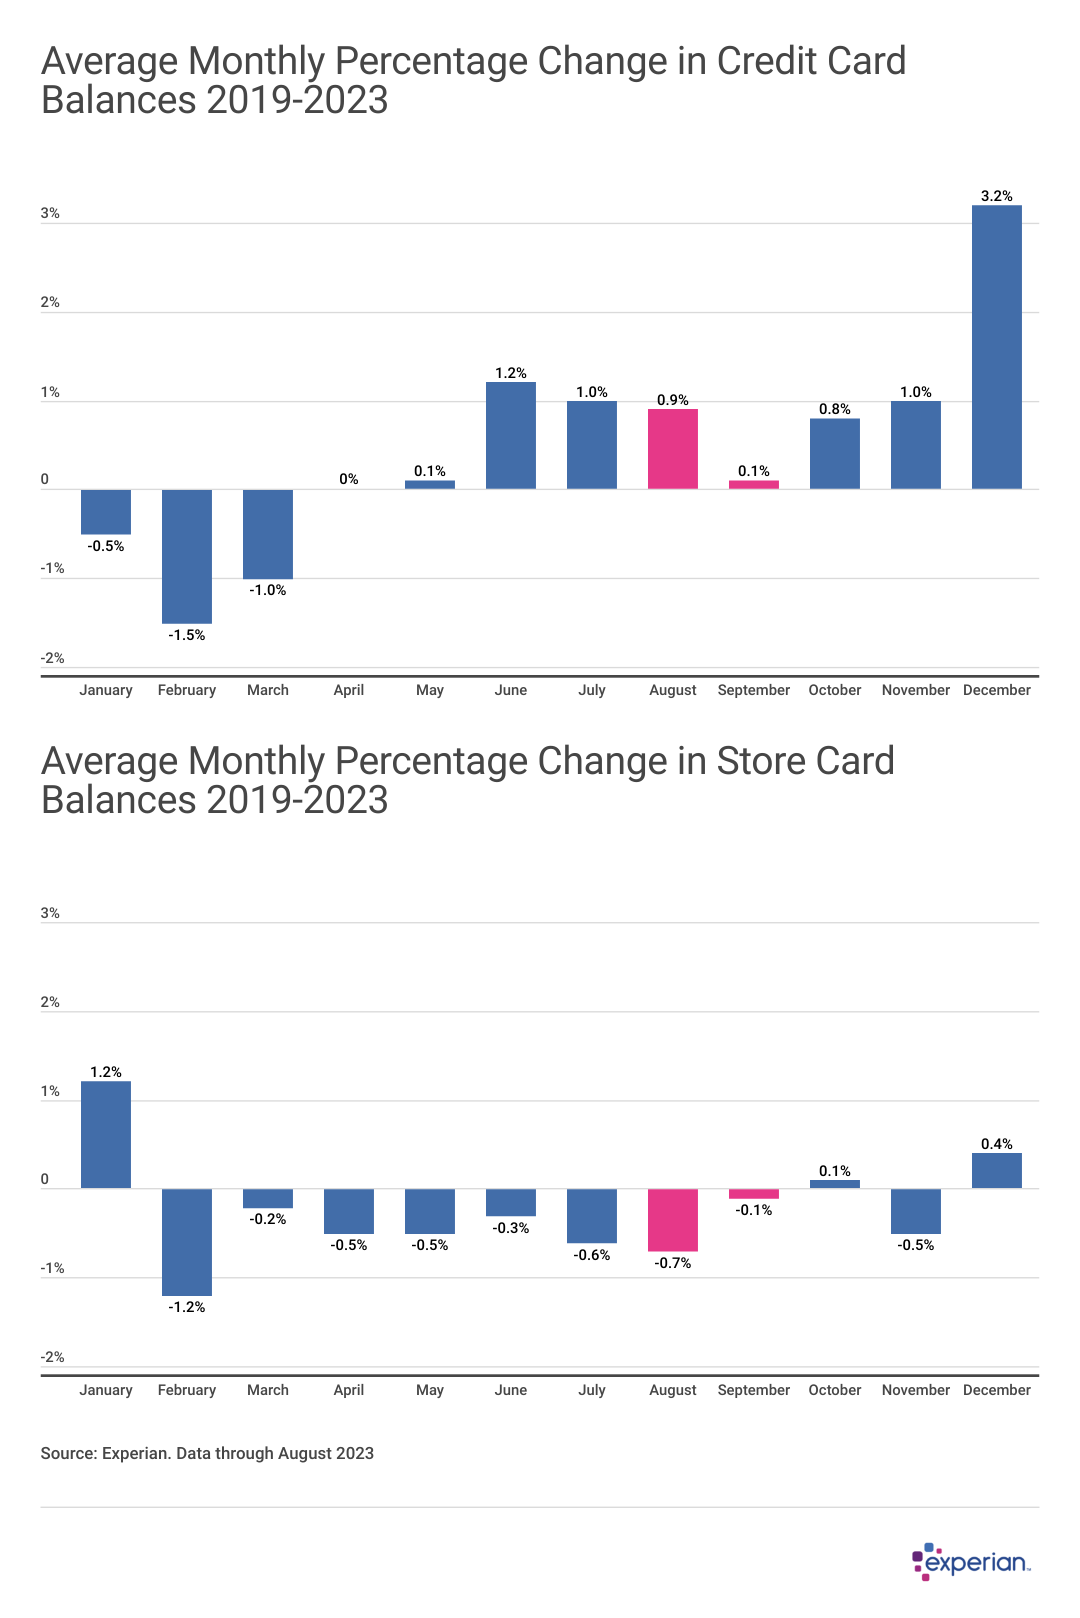 A pair of bar charts showing Average Monthly Percentage Change in Credit Card and Store Card Balances 2019-2023